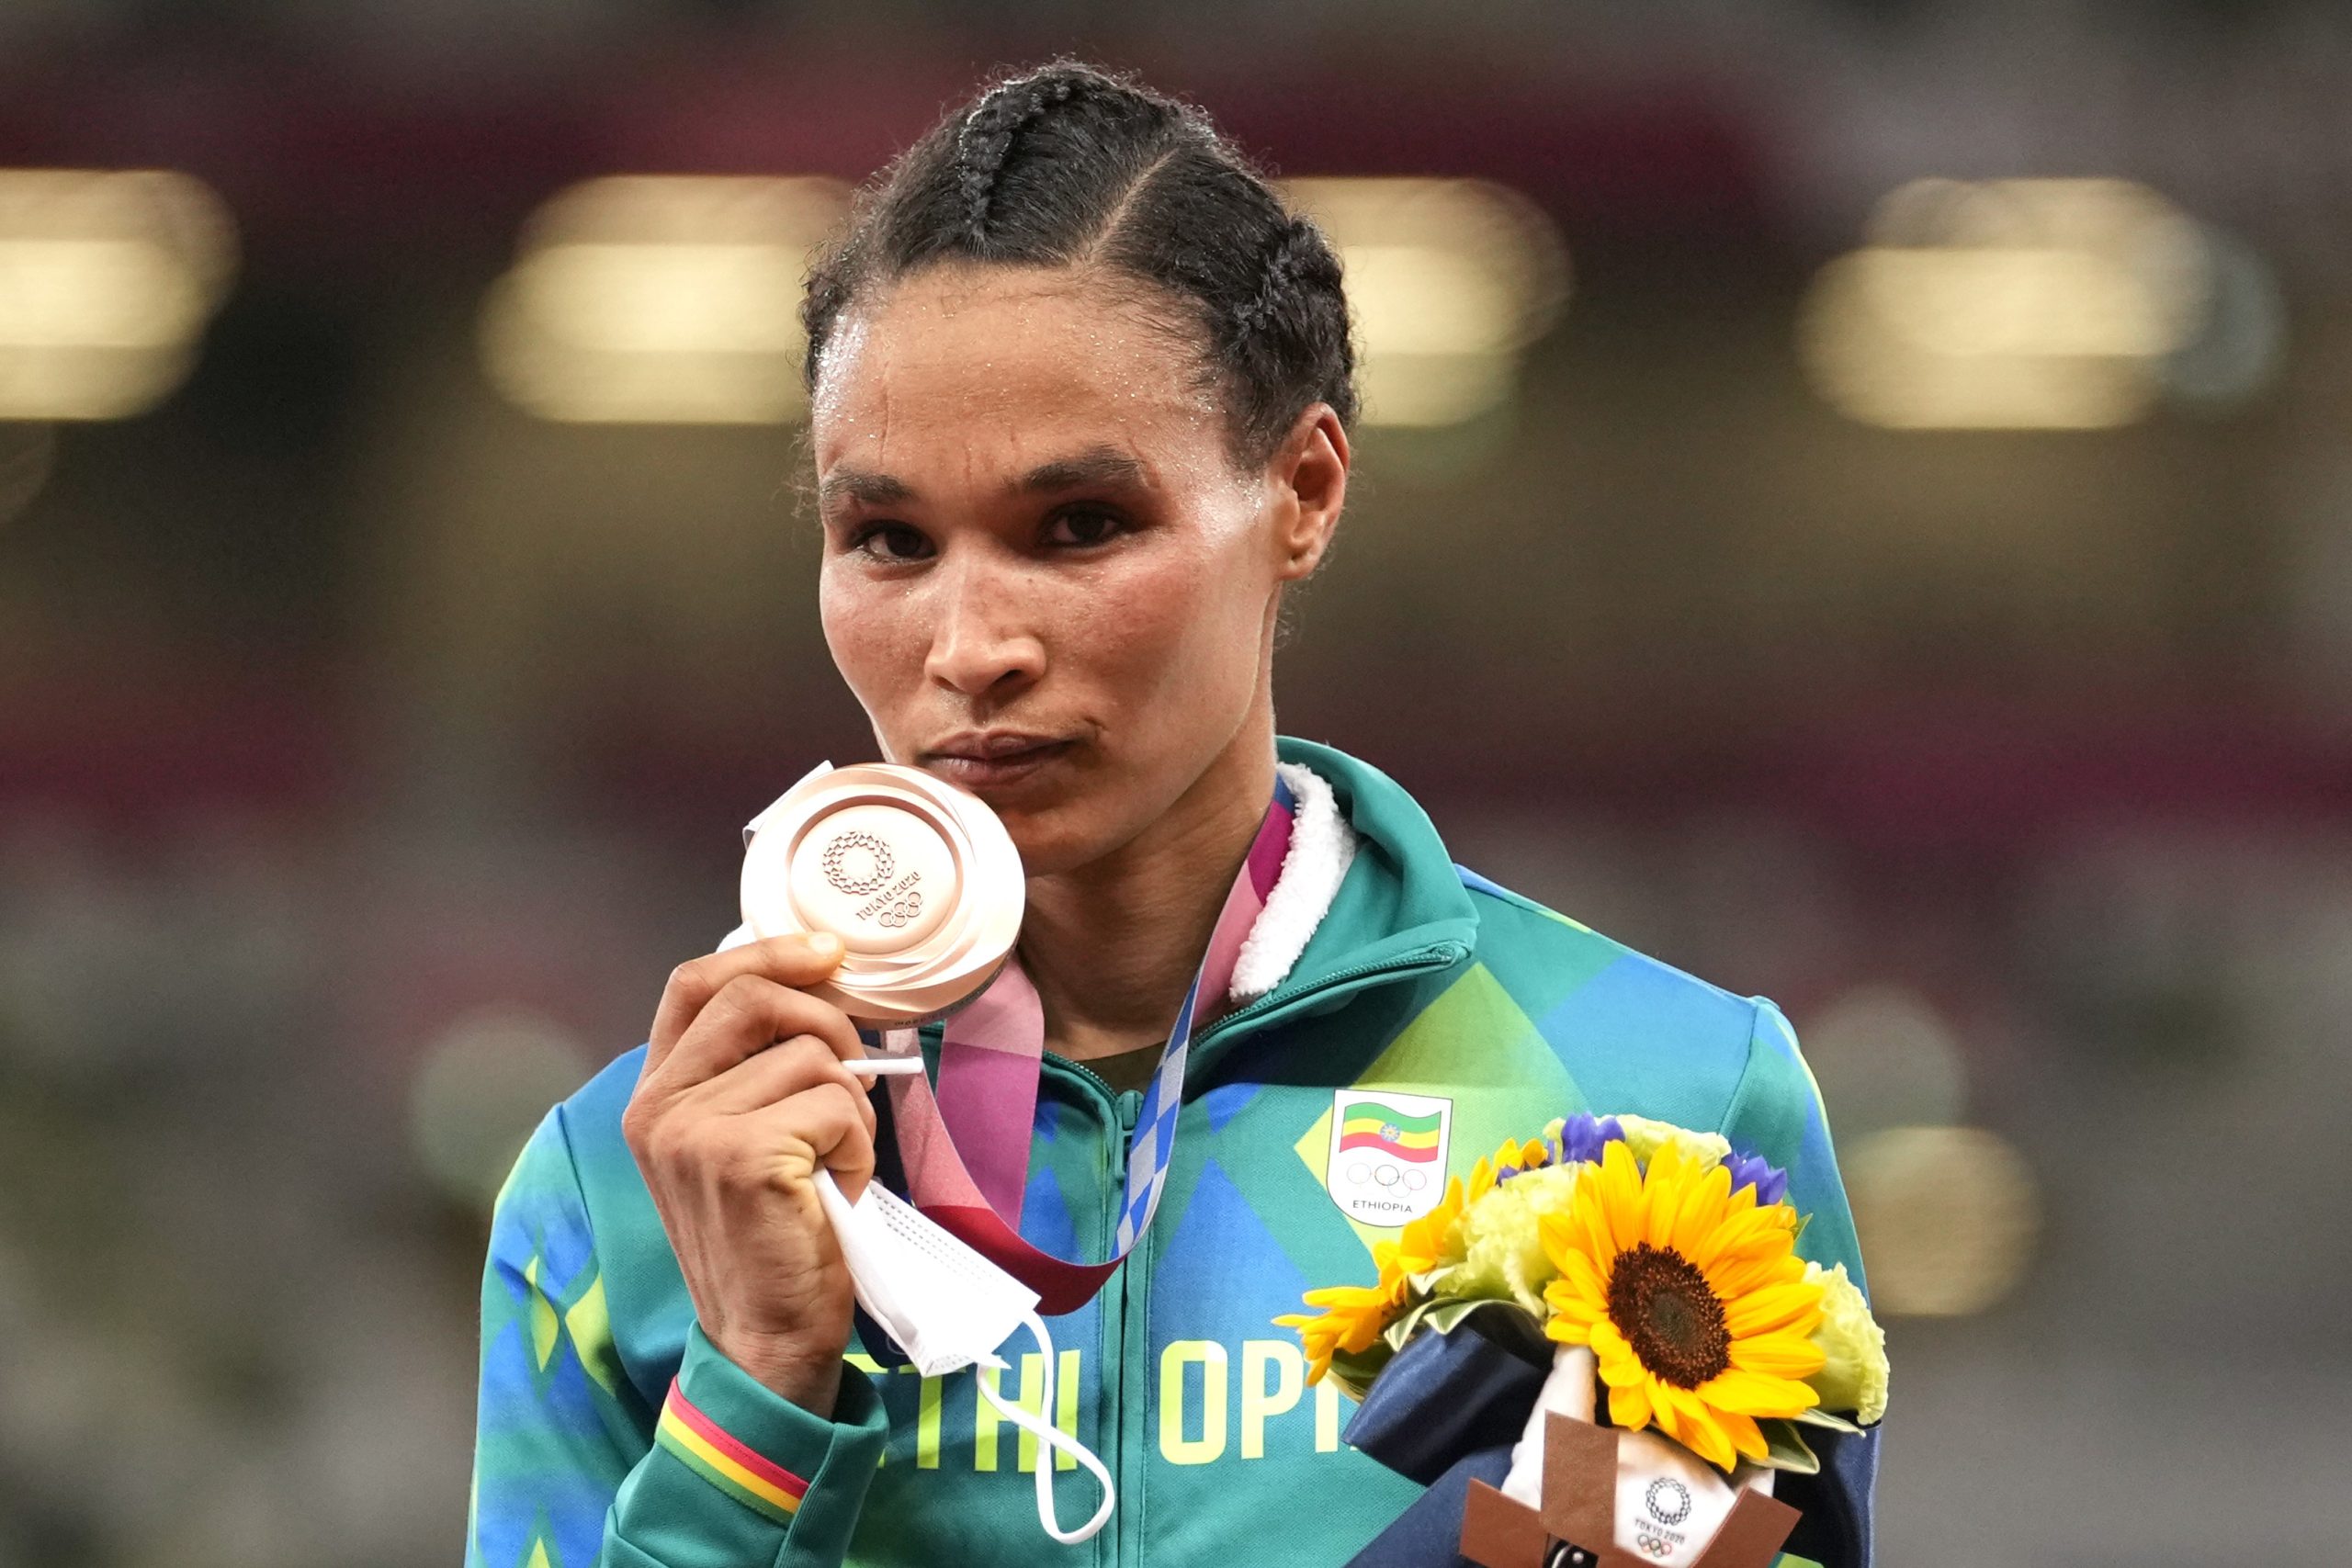 Bronze medalist Letesenbet Gidey, of Ethiopia, reacts during the medal ceremony for the women's 10,000-meters final at the 2020 Summer Olympics, Saturday, Aug. 7, 2021, in Tokyo. (AP Photo/Martin Meissner)